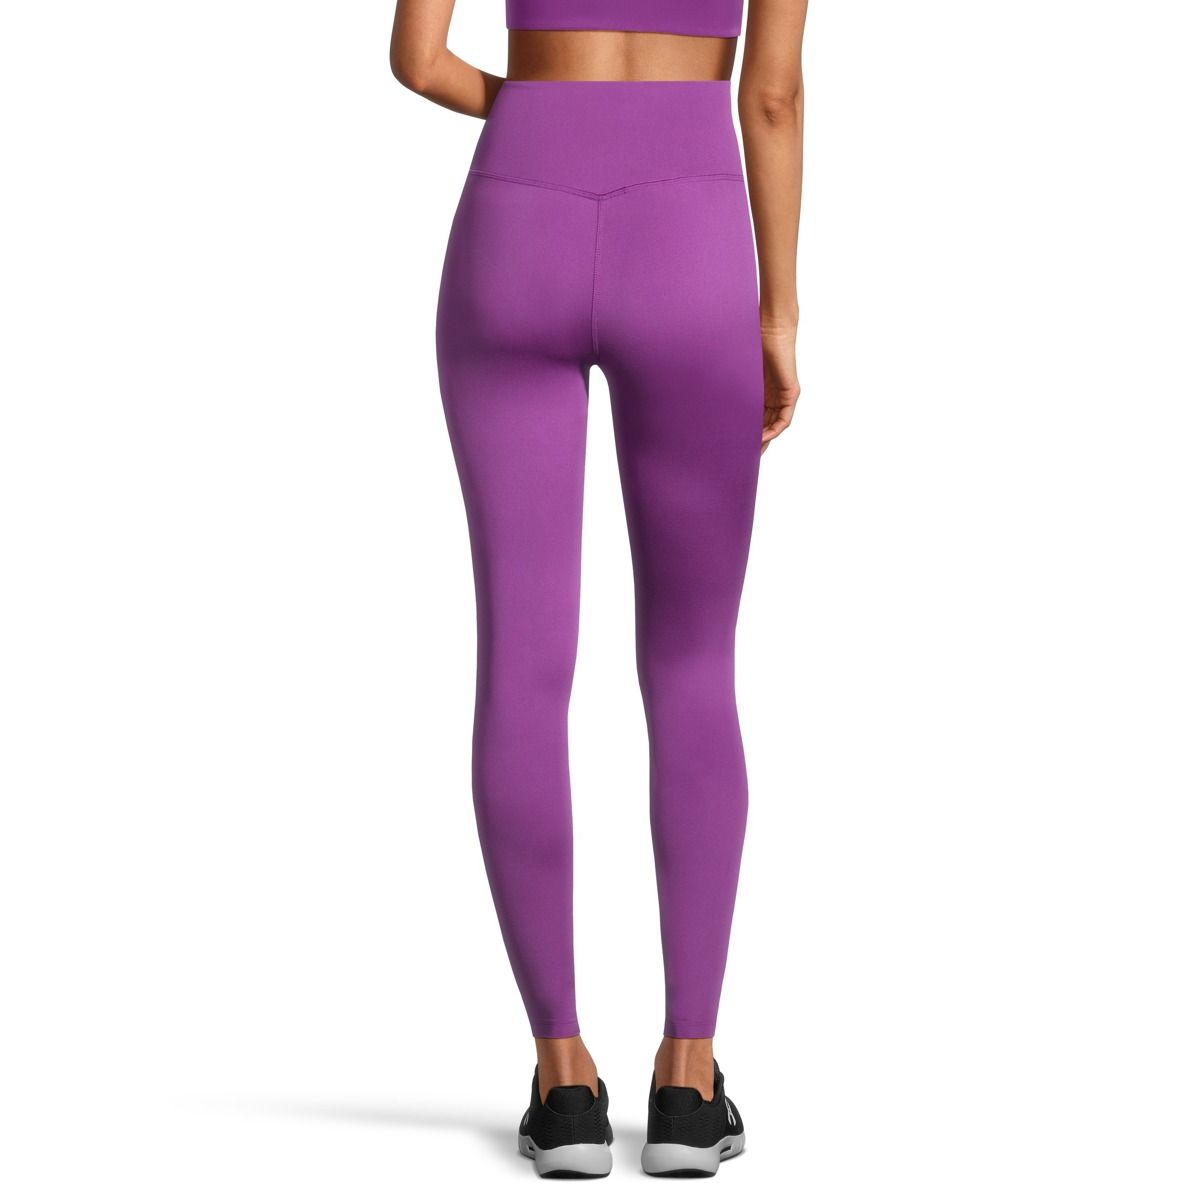 https://media-www.sportchek.ca/product/div-03-softgoods/dpt-70-athletic-clothing/sdpt-02-womens/334214680/gf-collective-w-float-ultralight-hr-legging-edc33bef-ce50-4583-bb7f-121646687eac-jpgrendition.jpg?imdensity=1&imwidth=1244&impolicy=mZoom